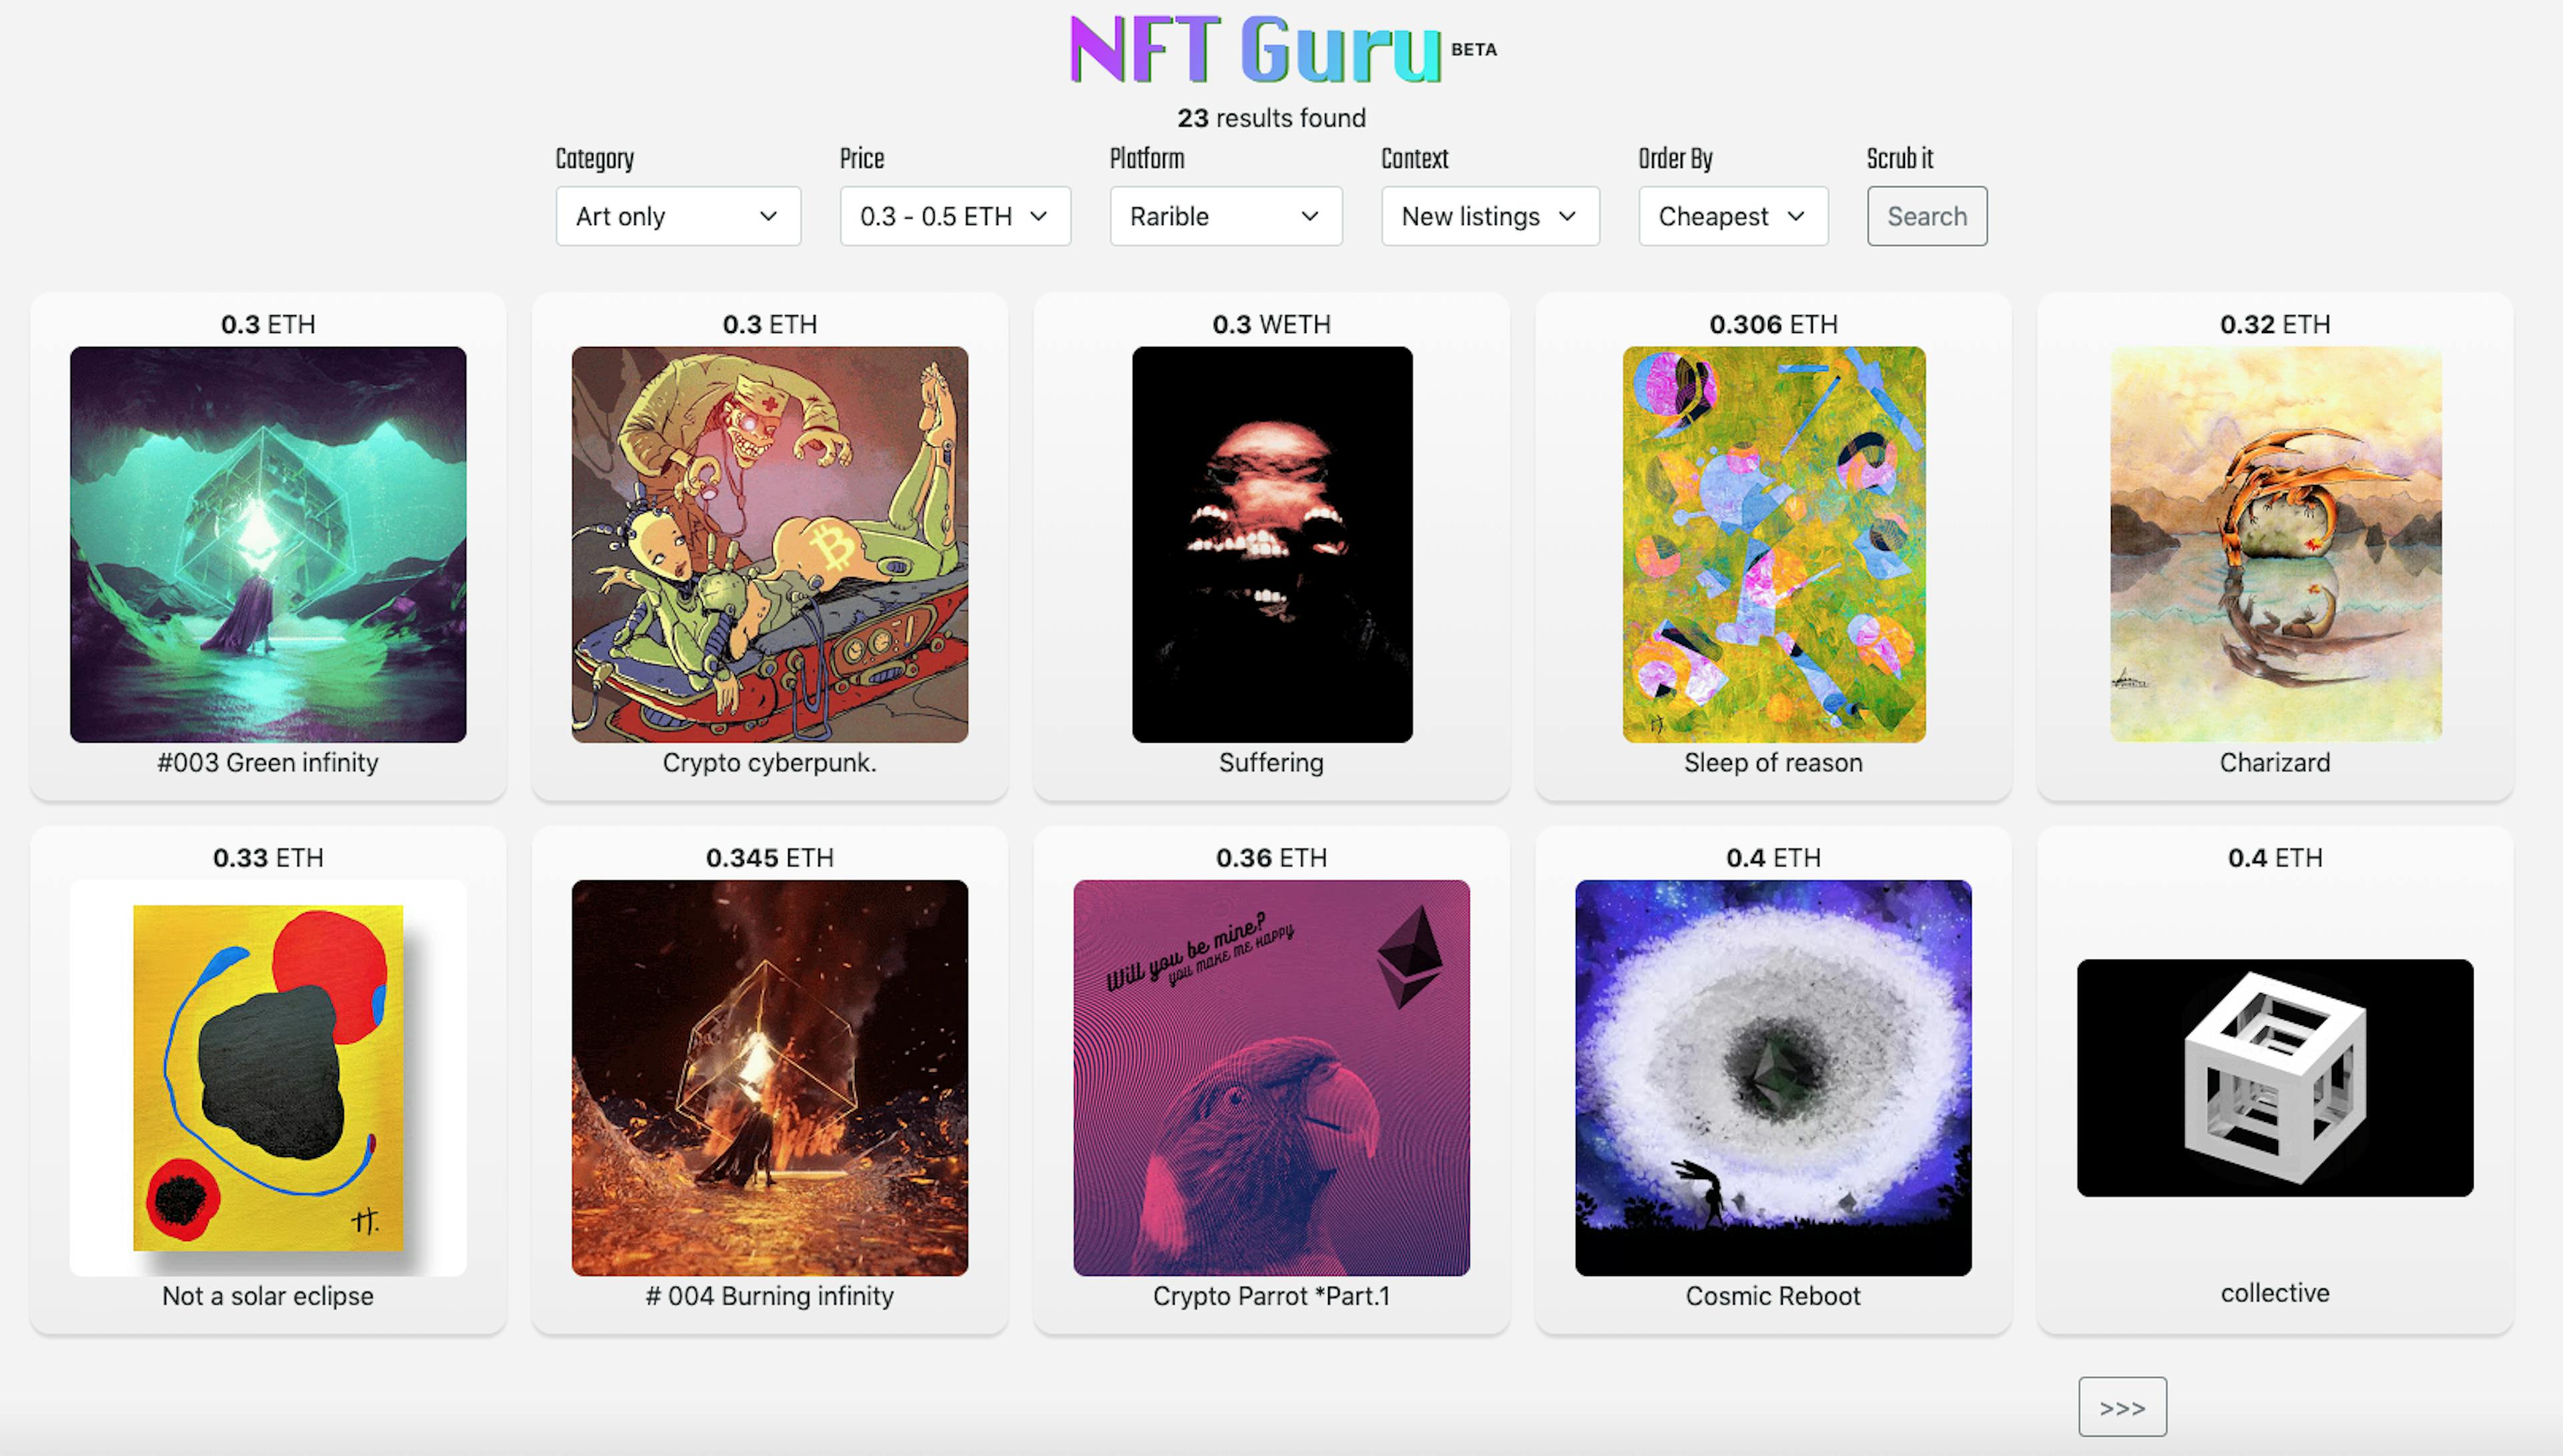 A screenshot of a search result page from nftguru.io